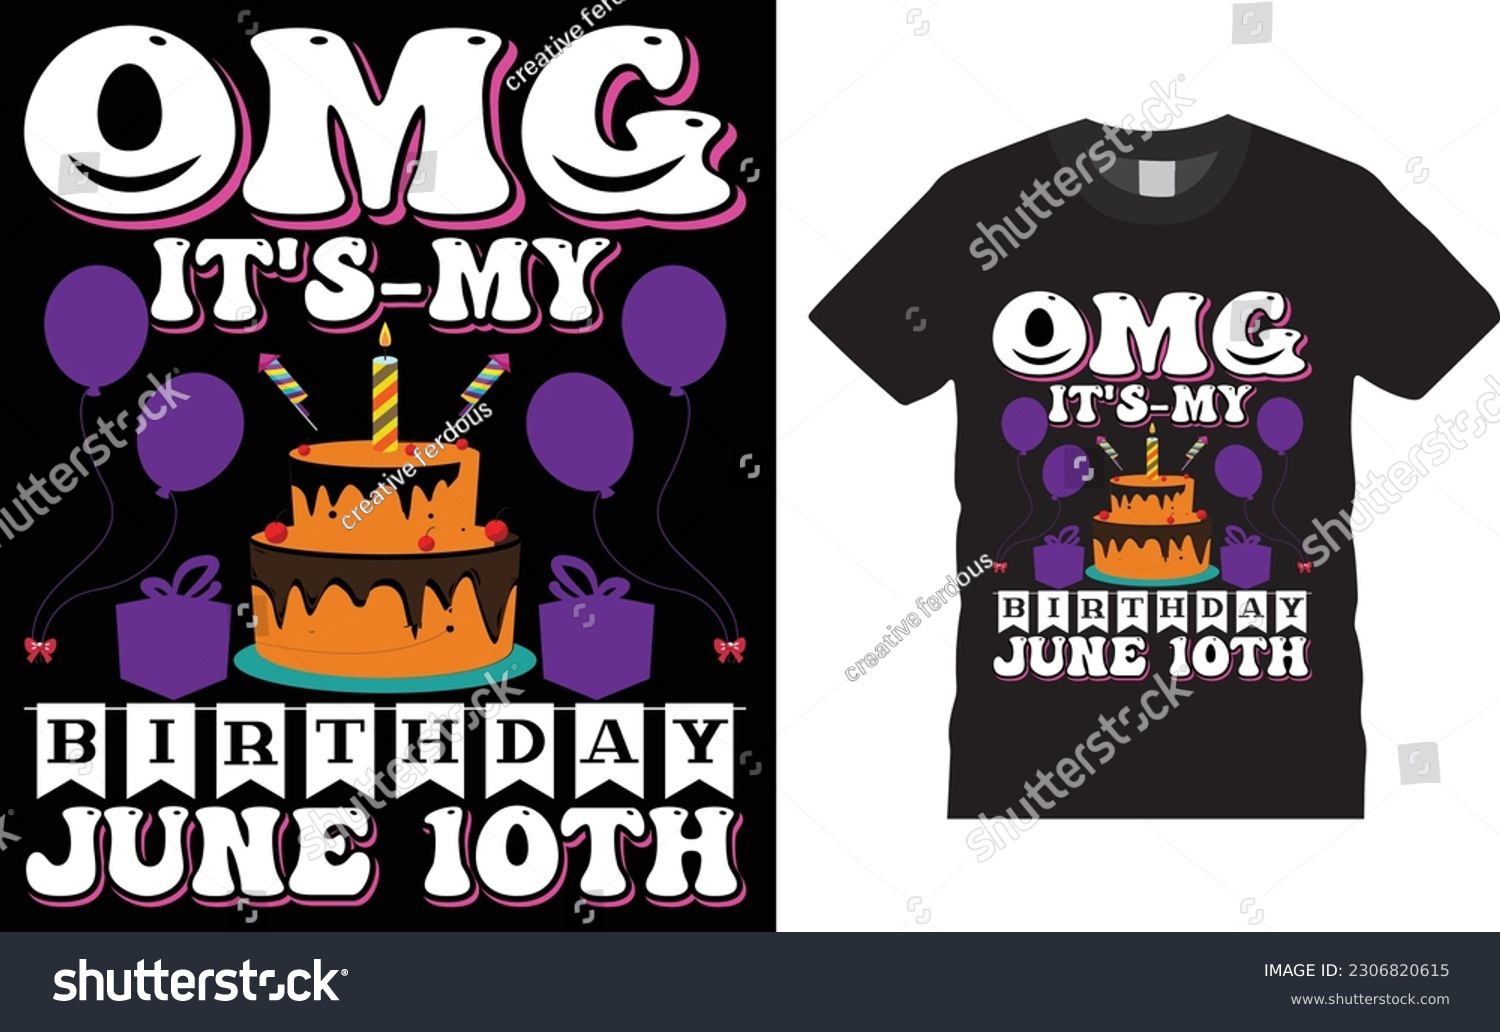 SVG of June 10th OMG It's My Birthday t-shirt design. June 10th t-shirt design. . June 10th  USA T-Shirt design template POD.  American T- shirts design ready for print. svg